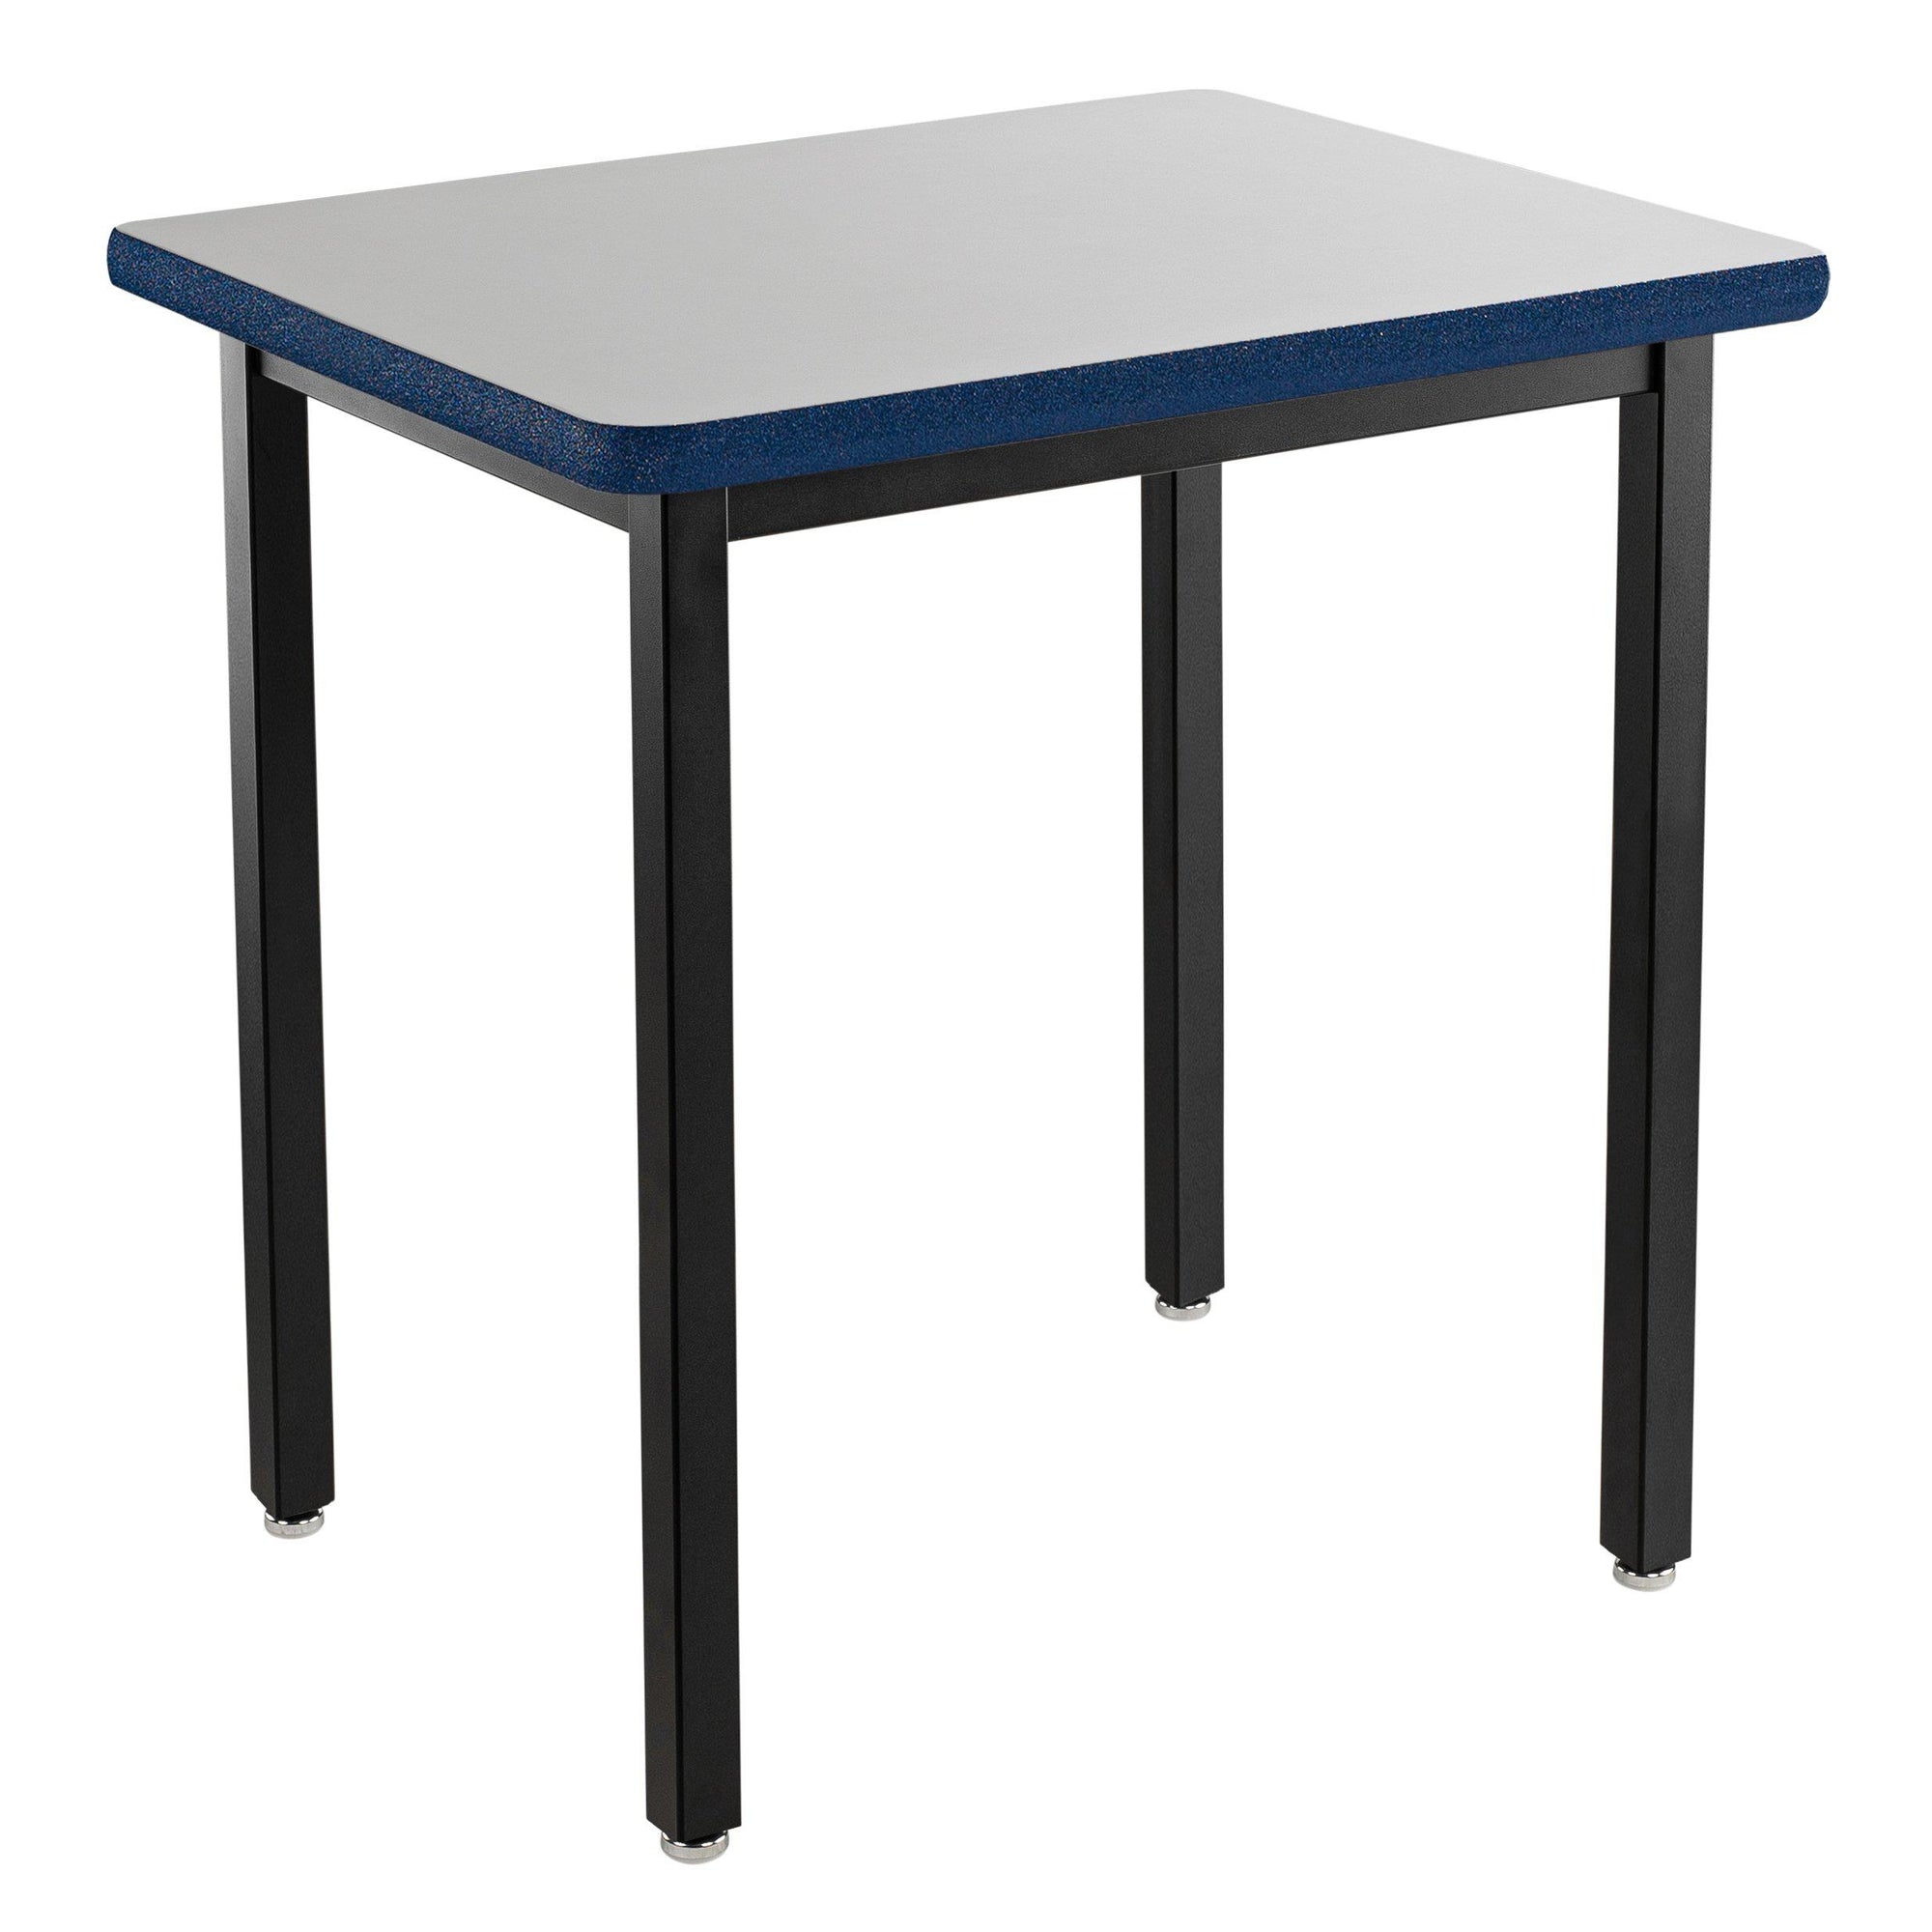 Heavy-Duty Fixed Height Utility Table, Black Frame, 24" x 36", Supreme High-Pressure Laminate Top with Black ProtectEdge